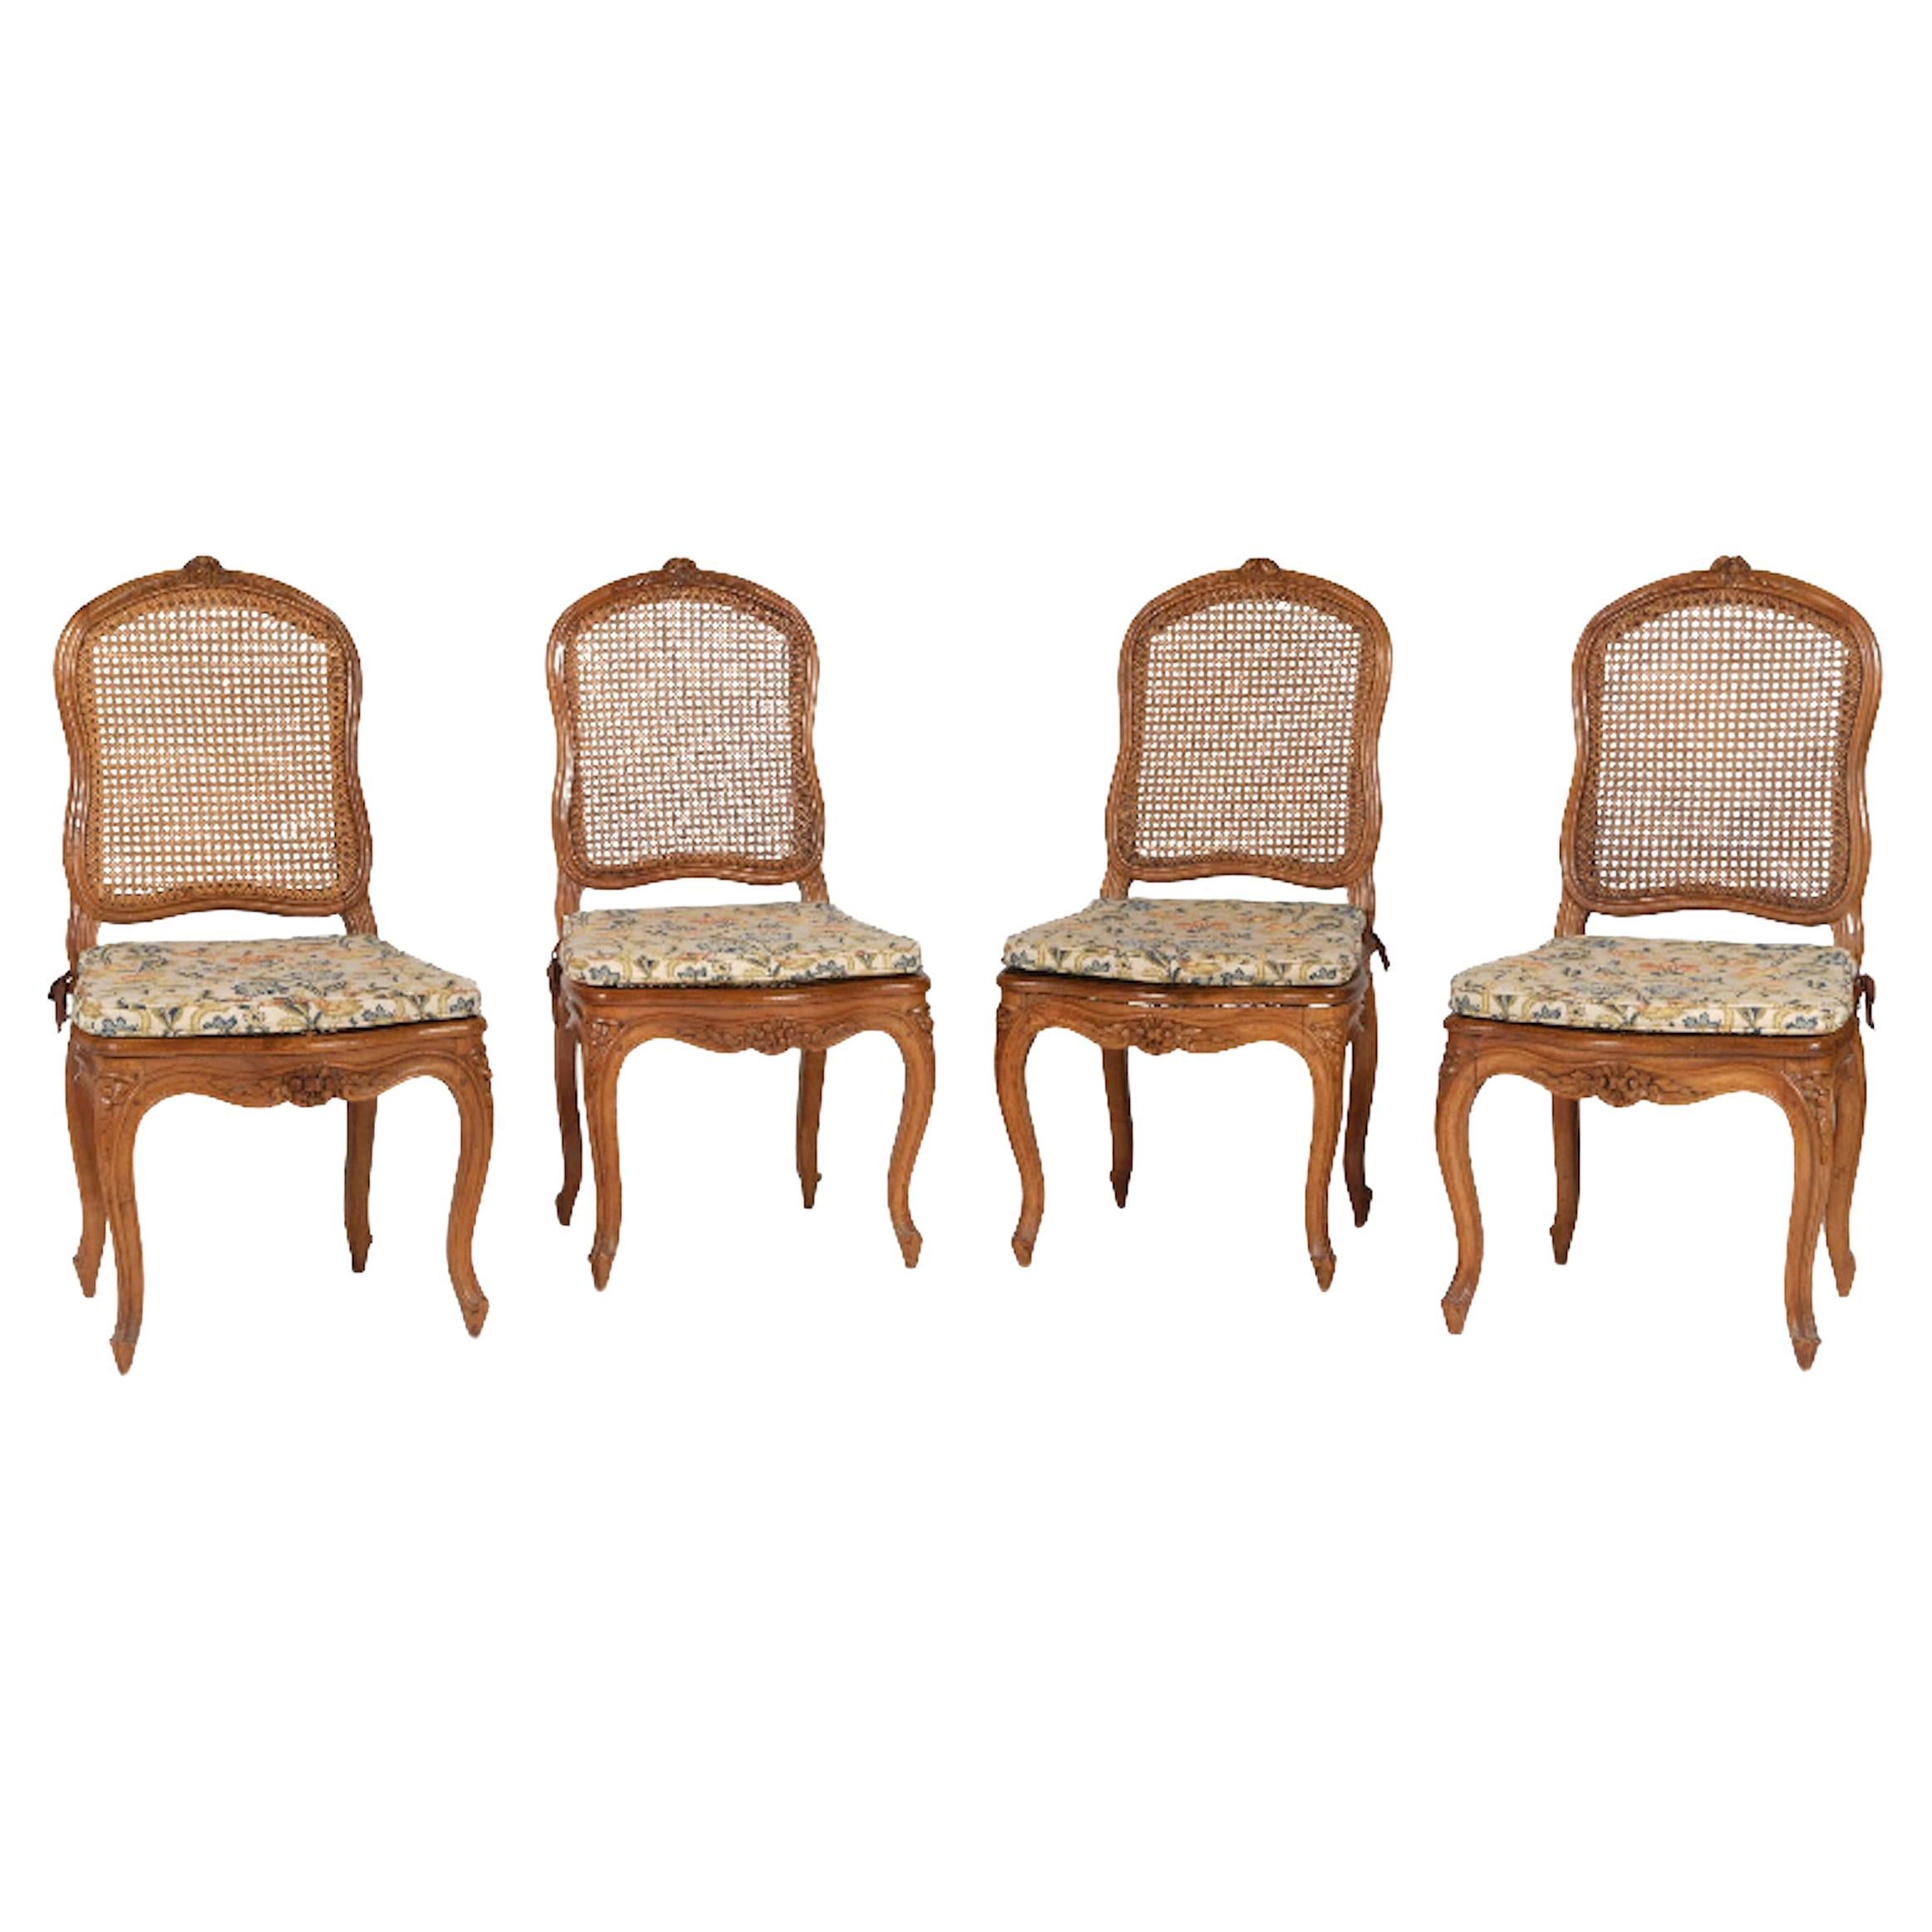 19th Century French Cane Chairs in Hand Carved Walnut Frame in Louis XV Style For Sale